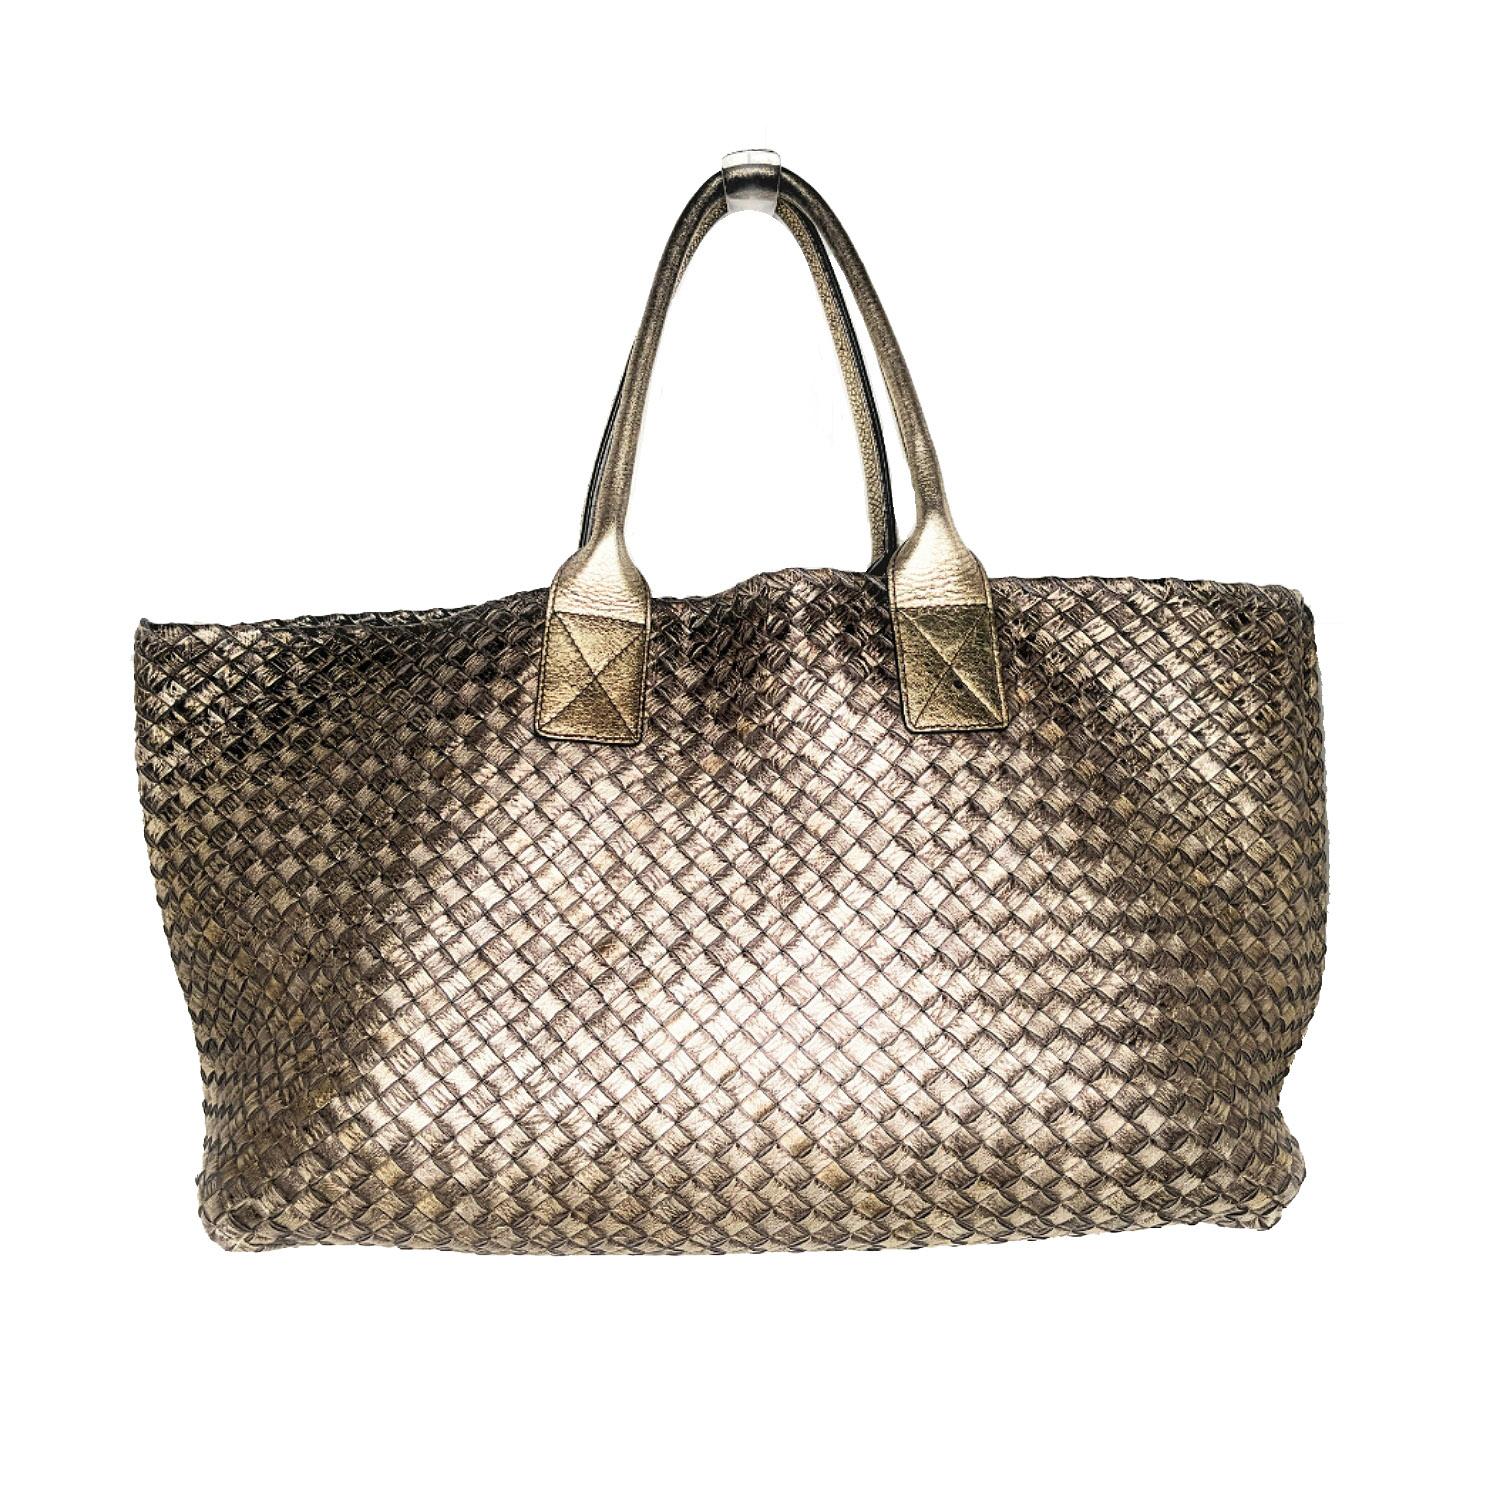 Metallic gold-tone Intrecciato Nappa leather Bottega Veneta Large Cabat tote with antiqued gold-tone hardware, dual rolled handles, tonal leather interior and open at top. Includes zip pouch.

Designer: Bottega Veneta
Material: Intrecciato woven